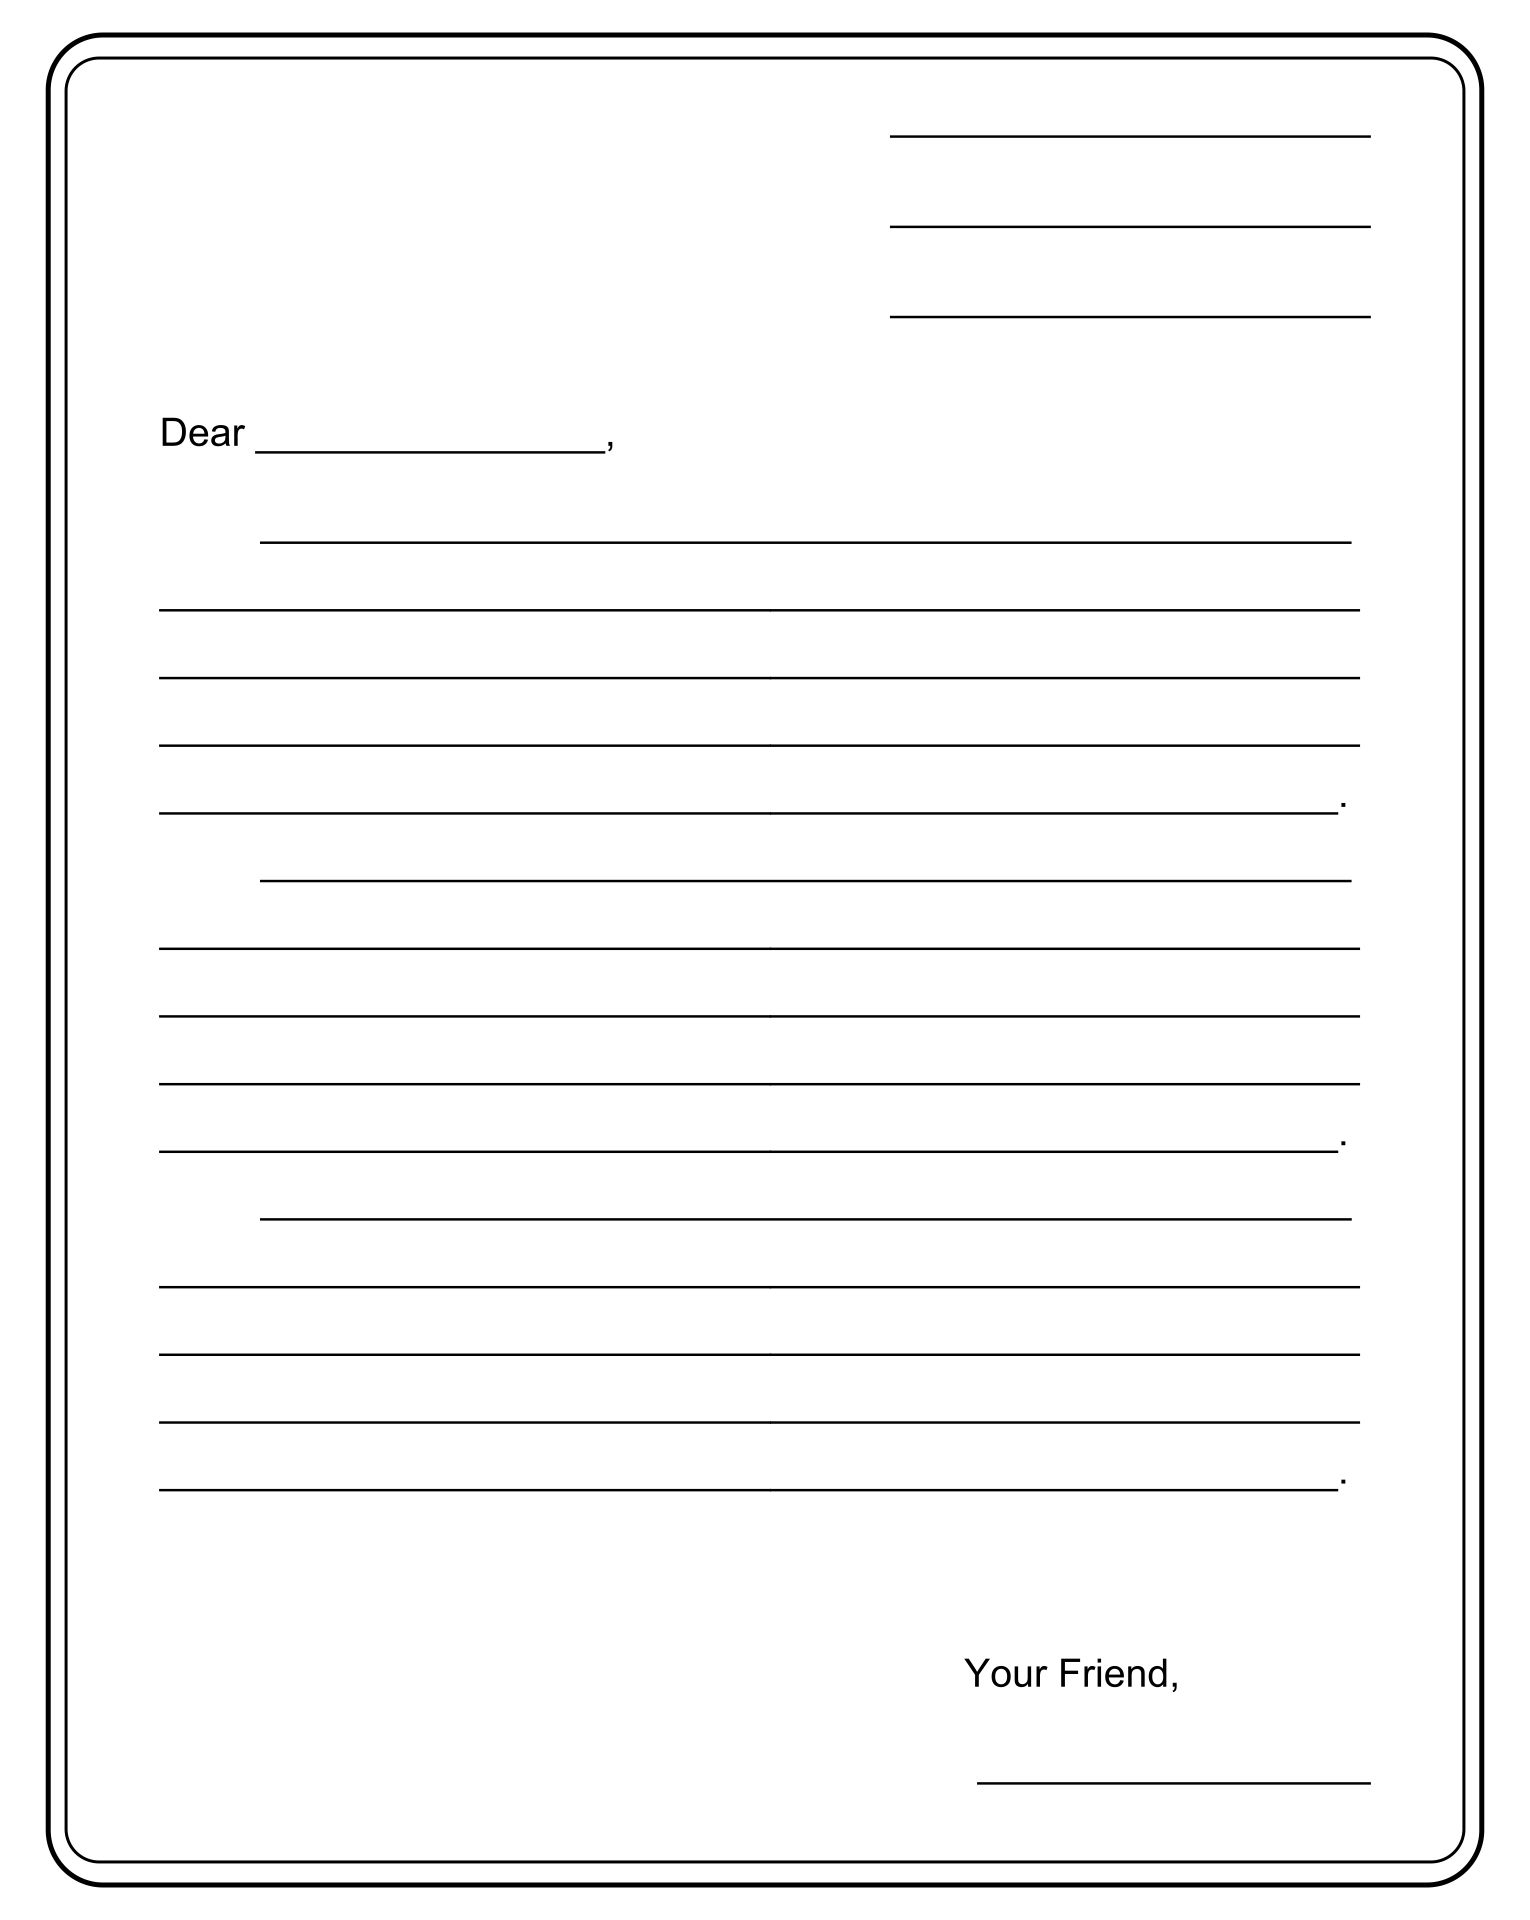 Free Printable Friendly Letter Template Printable Templates - Bank2home.com